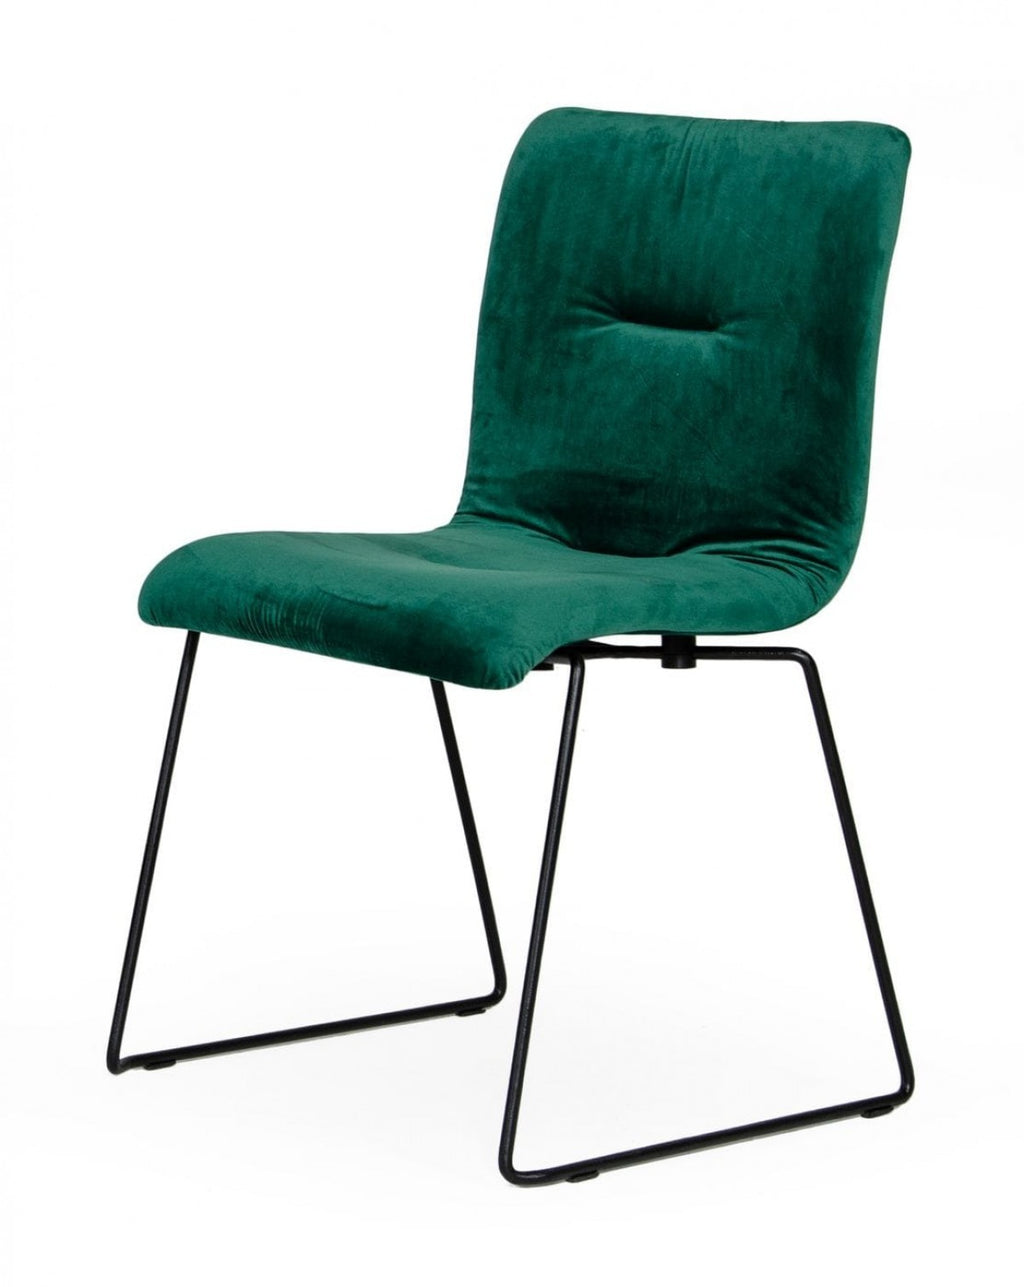 Set of Two Emerald Green Velvet Dining Chairs - 99fab 